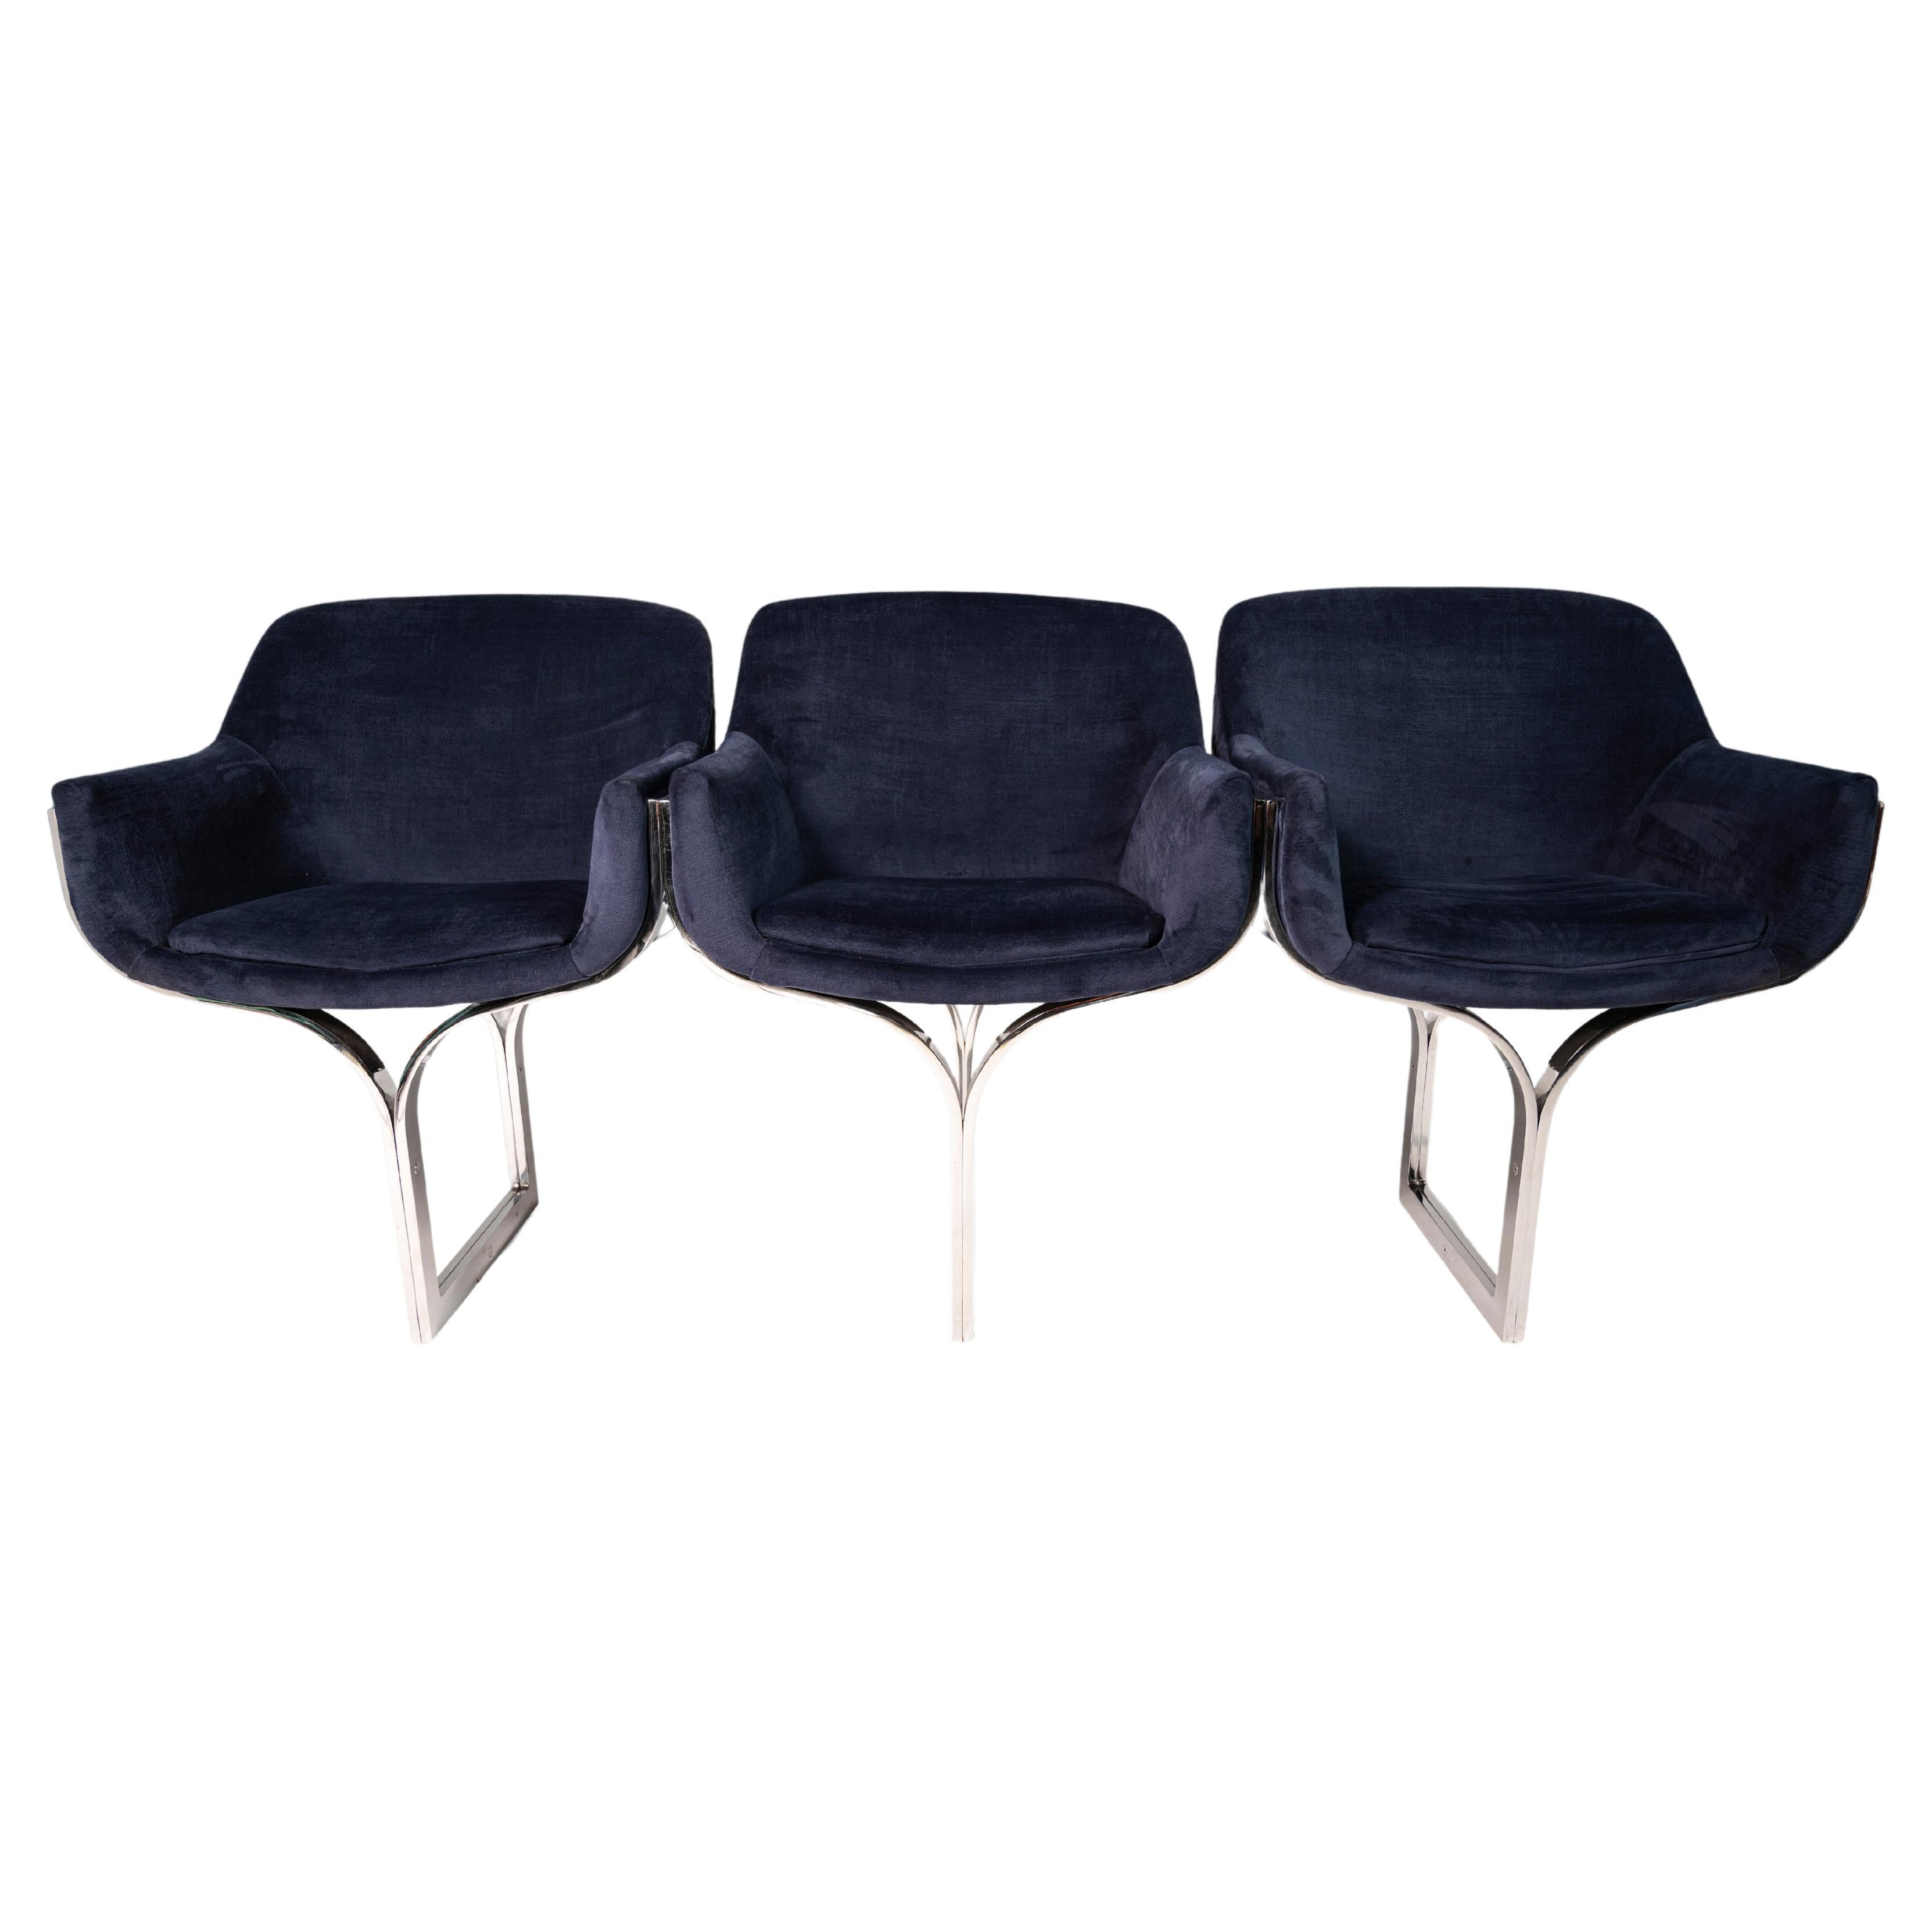 An jaw dropping statement piece. This three seat bench is attributed to Milo Baughman. The comfortable concave seats are found in navy velvet upholstery and are set on a sumptuous chrome base.

---Dimensions---

Width: 73 in / 185.42 cm
Depth: 22.5